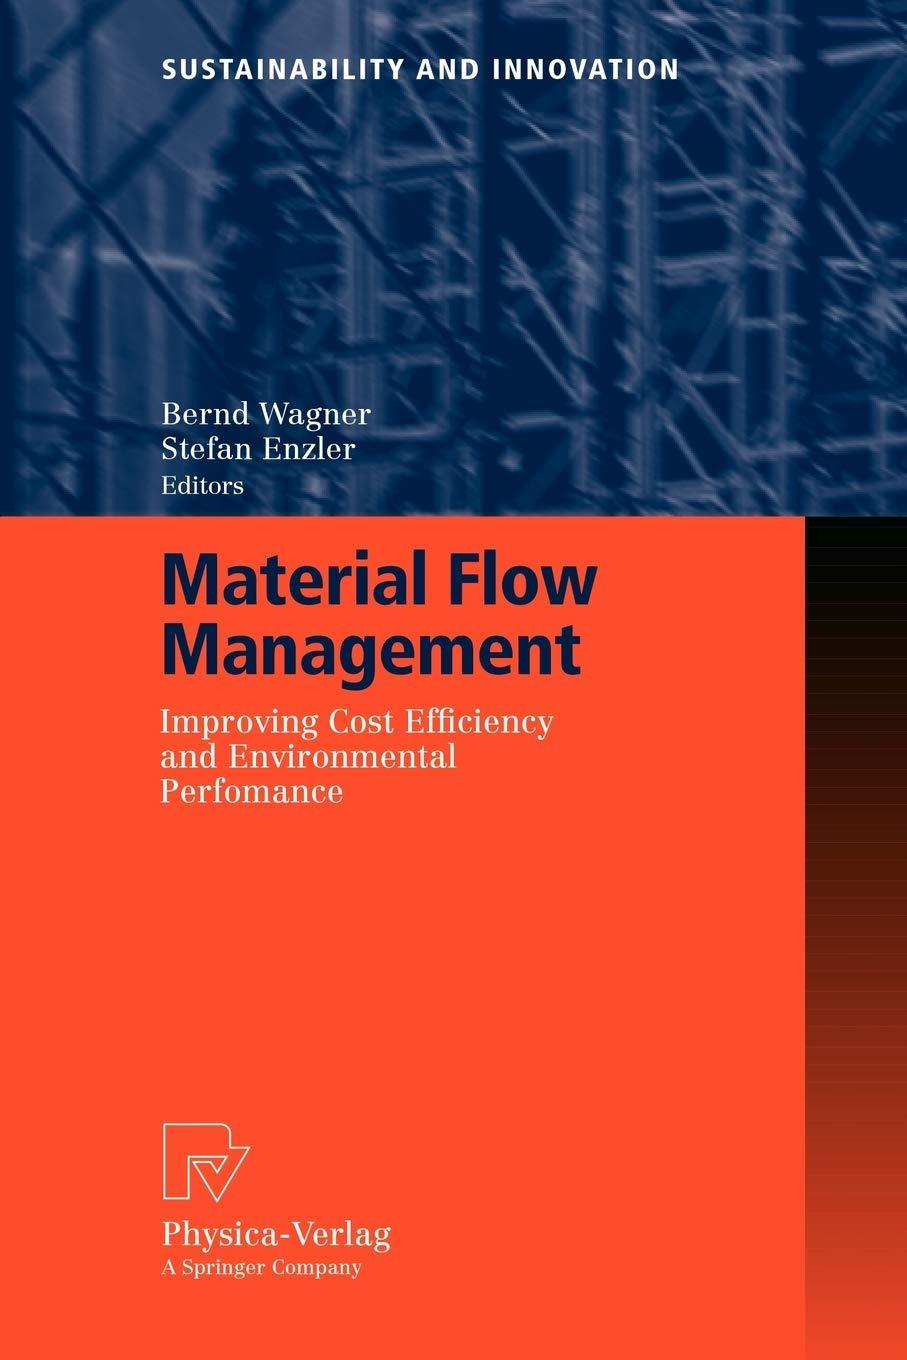 sustainability and innovation material flow management improving cost efficiency and environmental